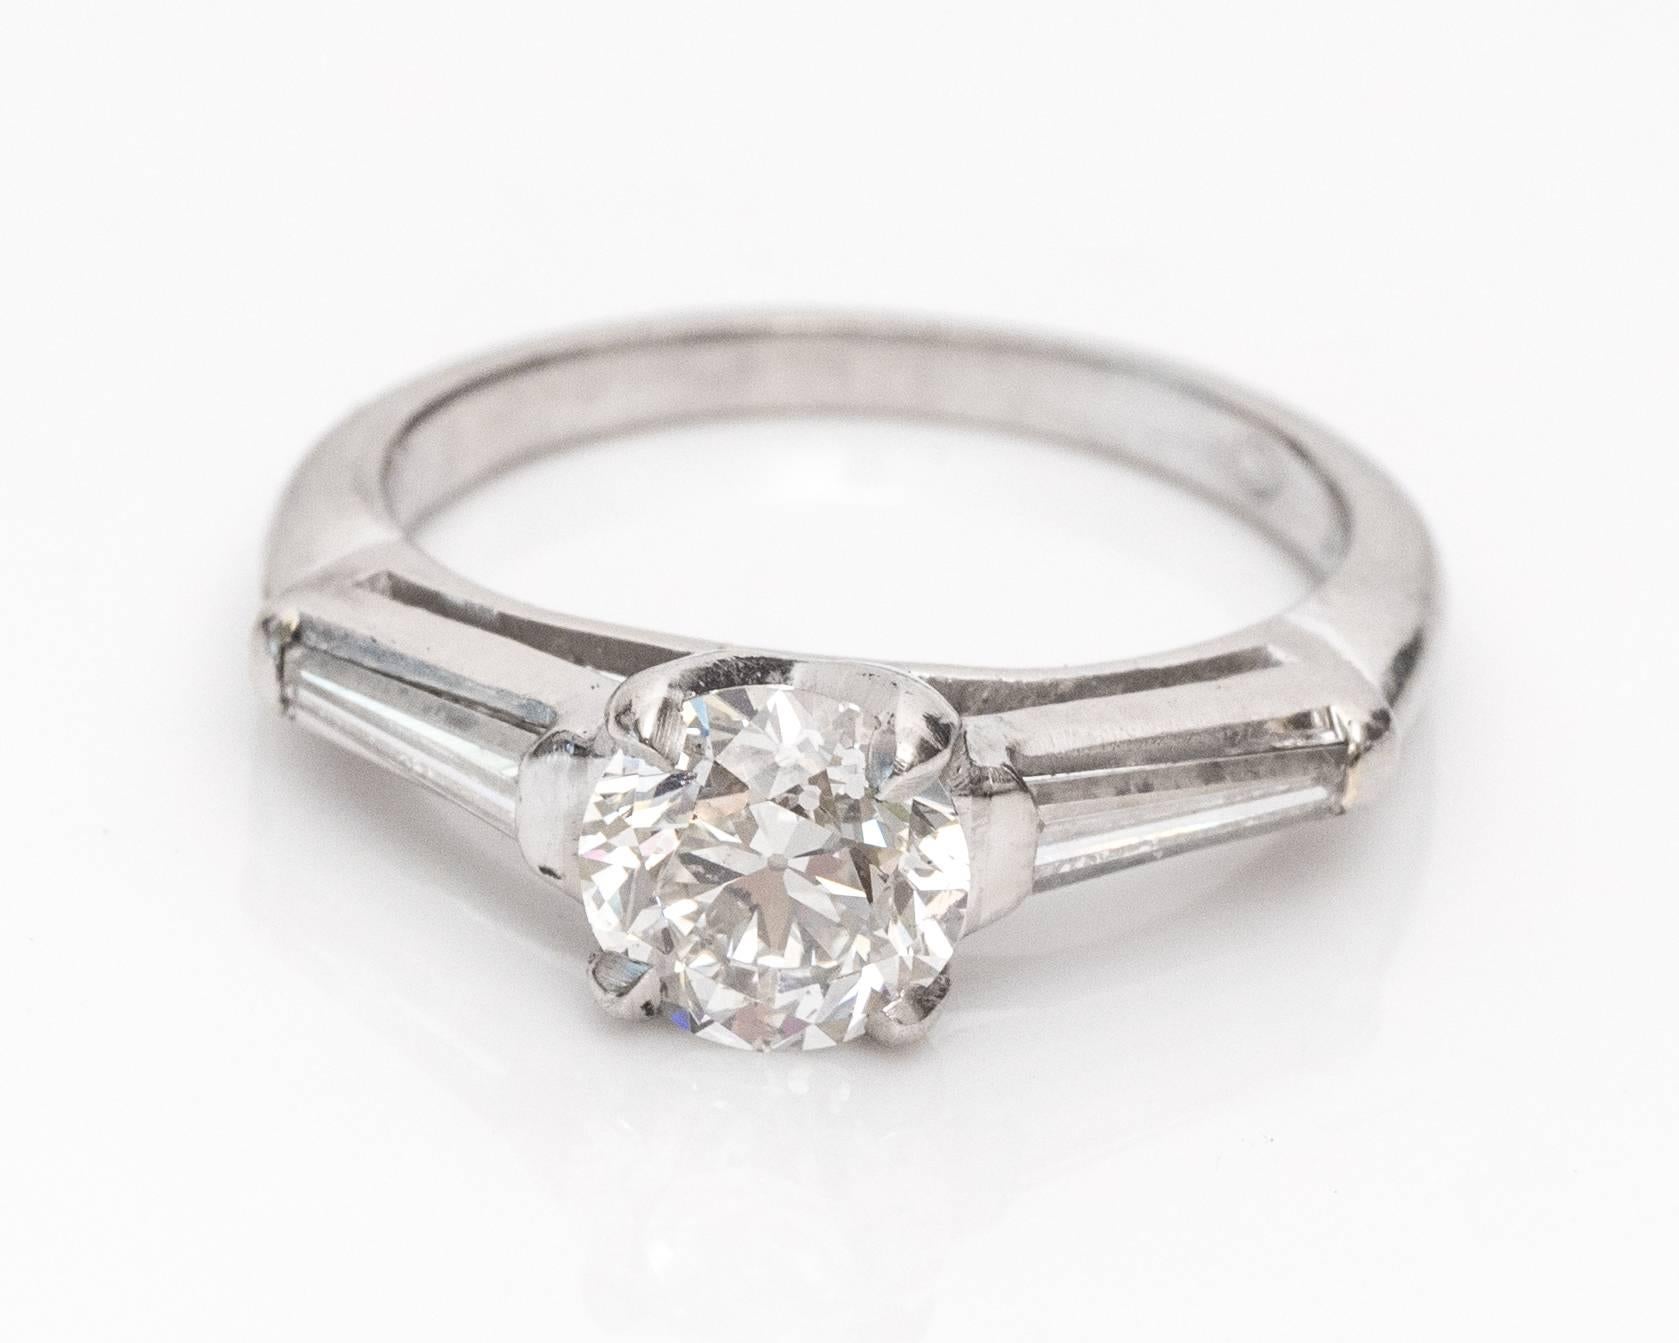 This ring shines with simplicity and sophistication. The timeless style will last through the ages, just as it already has! This 1925 ring has a GIA certified center diamond with an Old European shape and .87 carat weight. The diamond is set in a